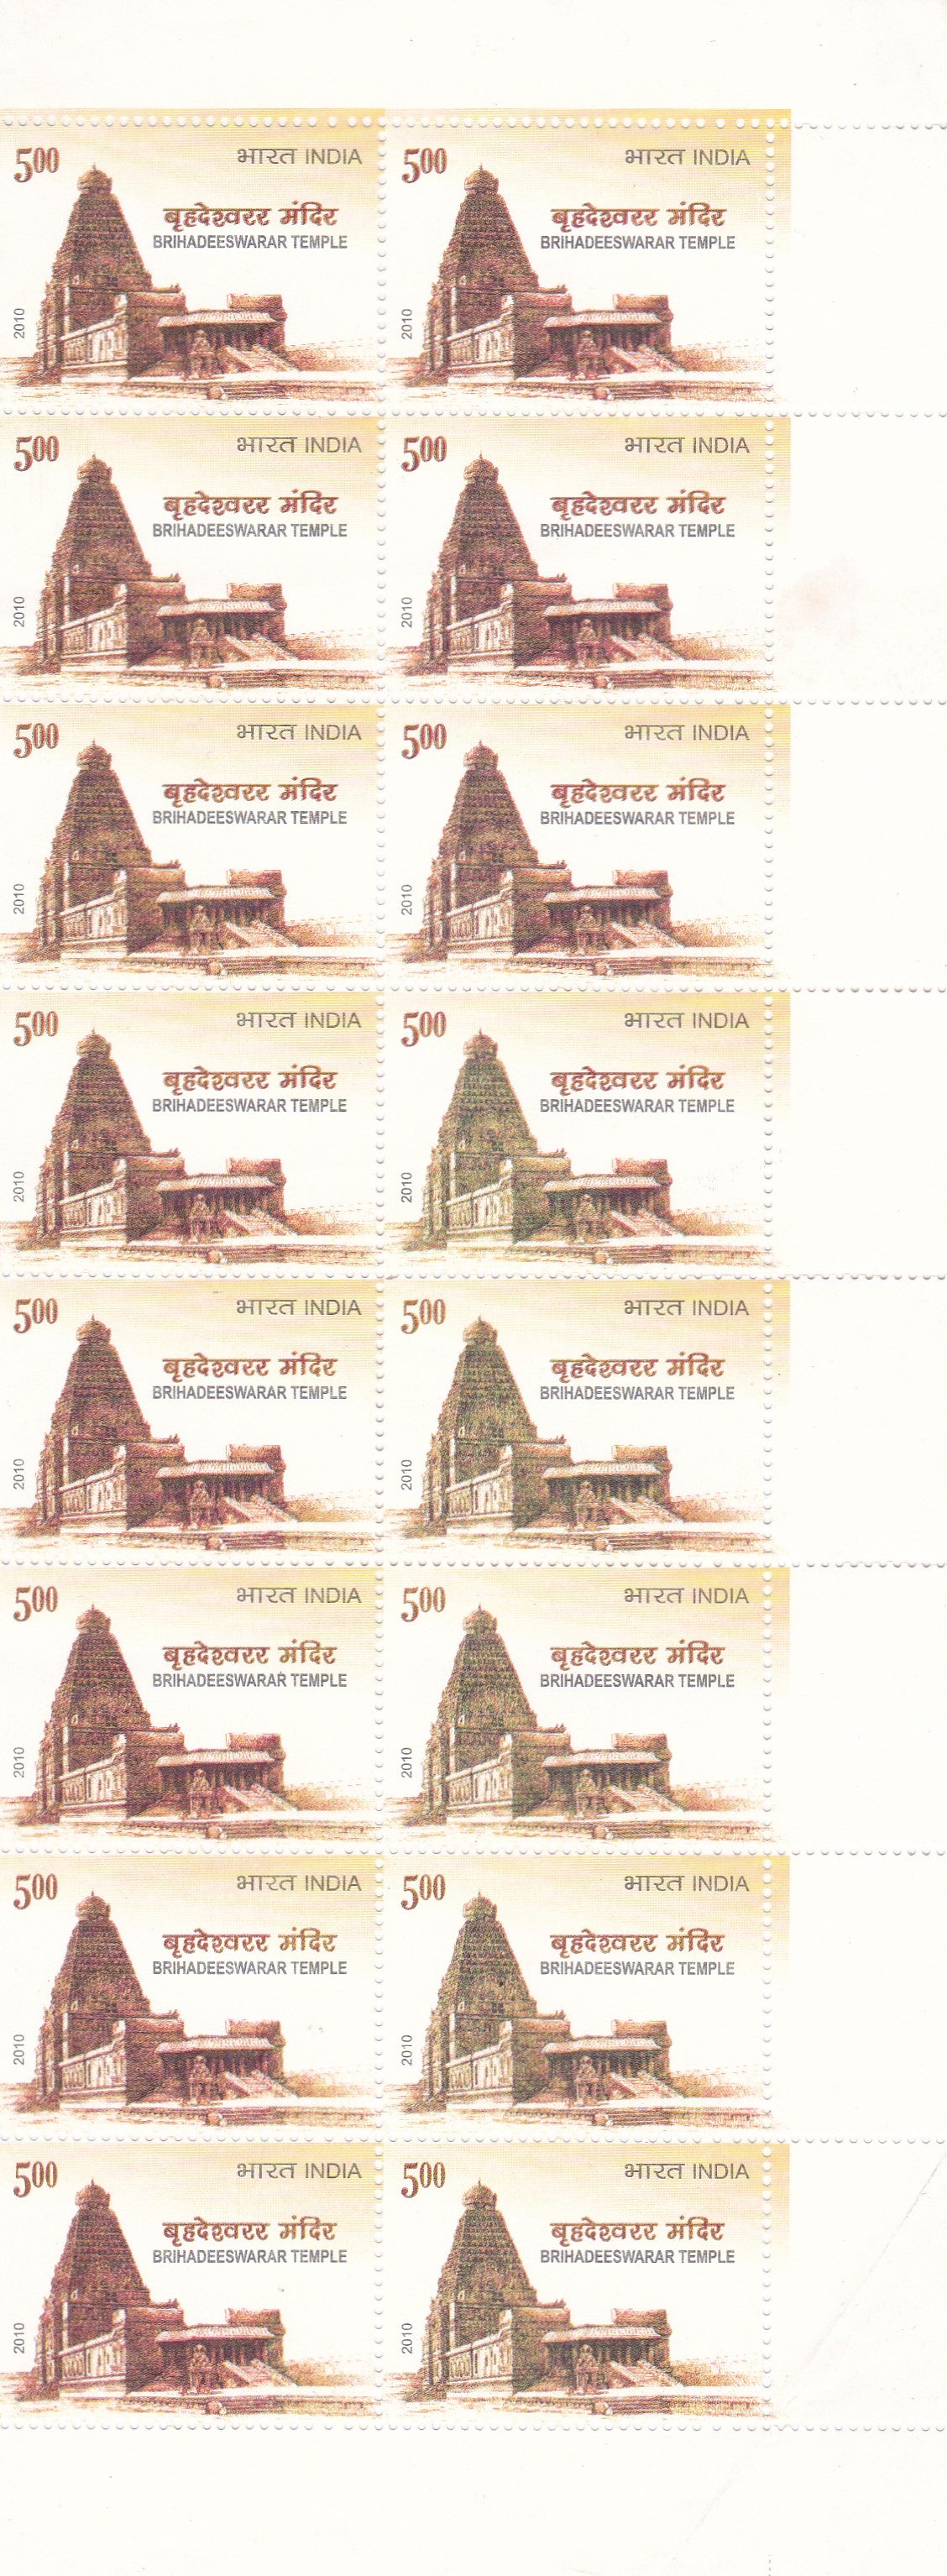 India-2010 Brihadeeswarar Temple B16 error stamps with color omission in 5 stamps.